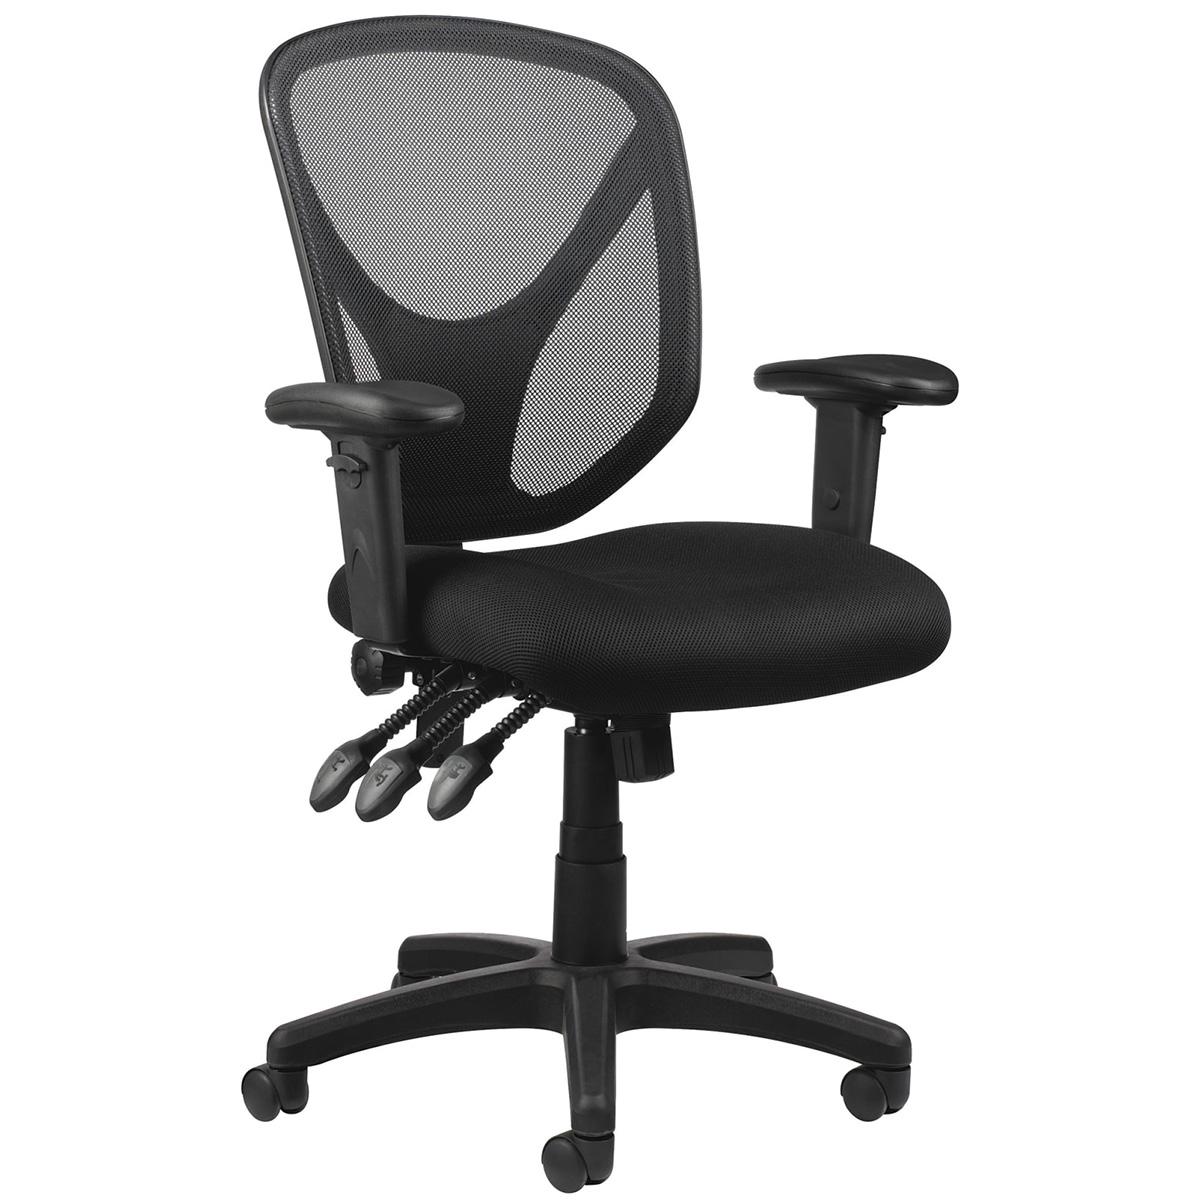 Realspace MFTC 200 Mesh Ergonomic Mid-Back Task Chair for $99.99 Shipped